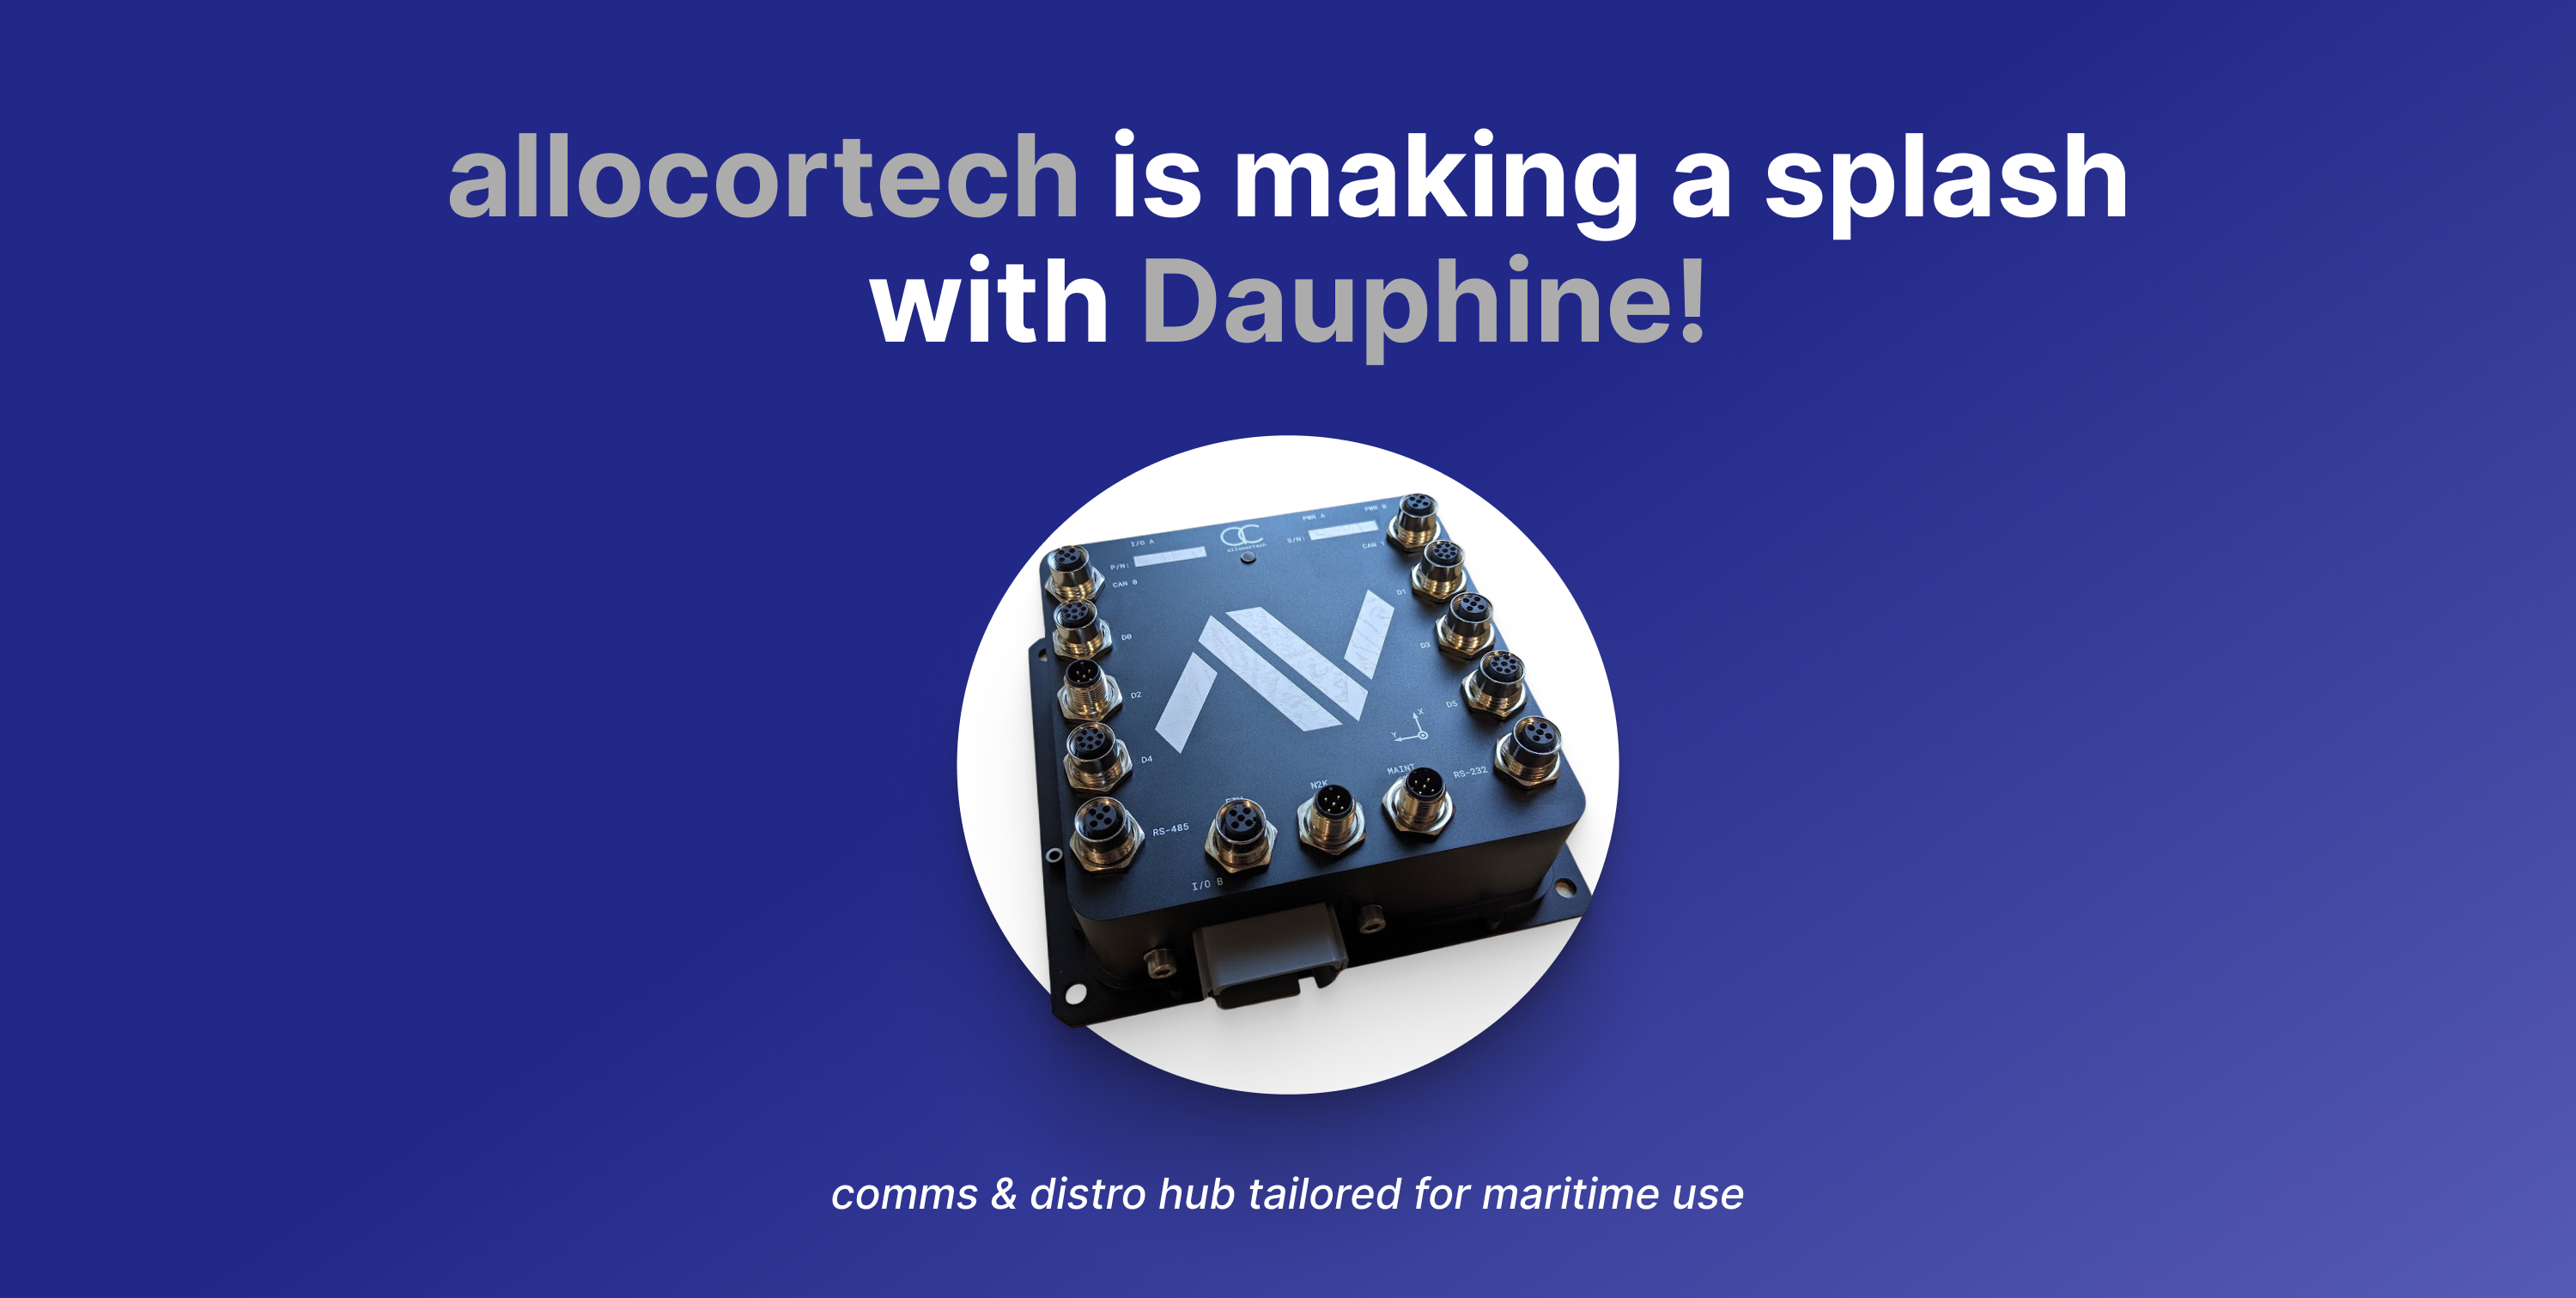 We’re Making a Splash With Dauphine!